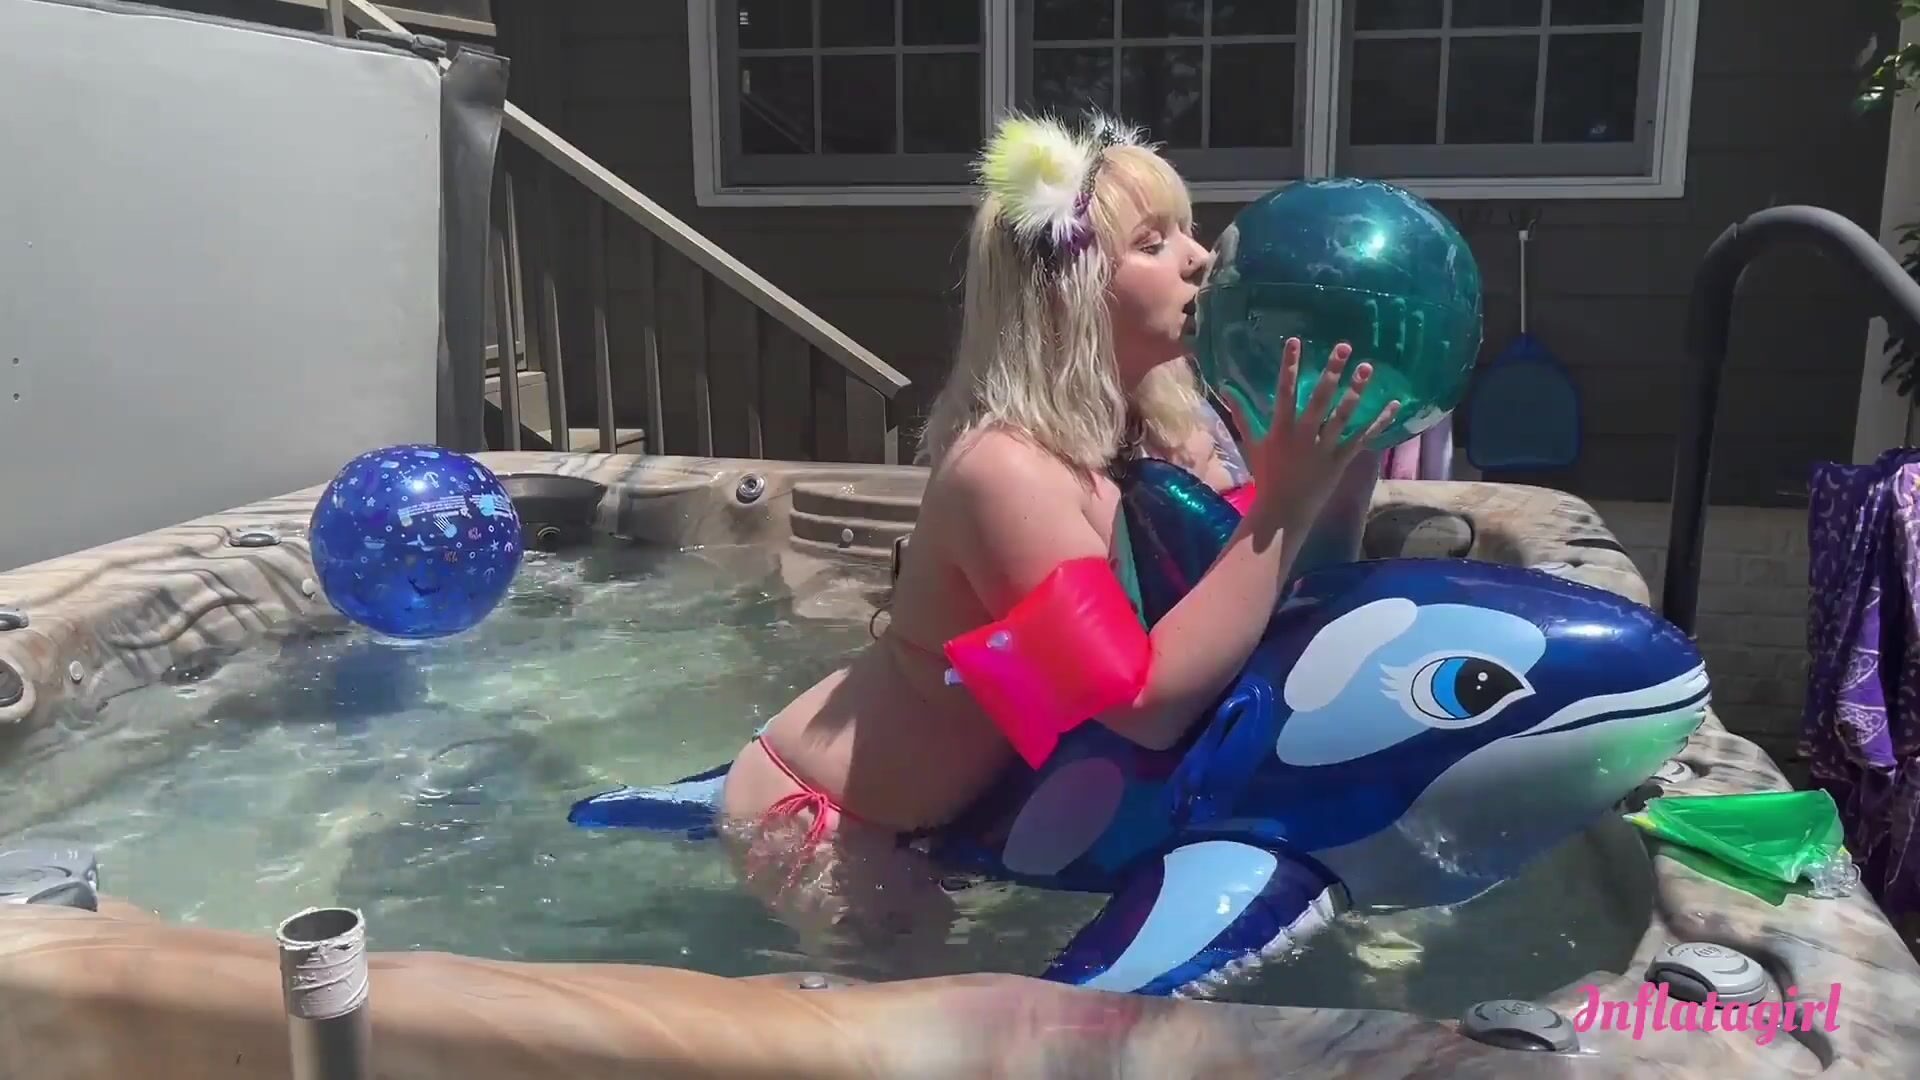 Inflatagirl fun with my pool toys in the hot tub xxx video